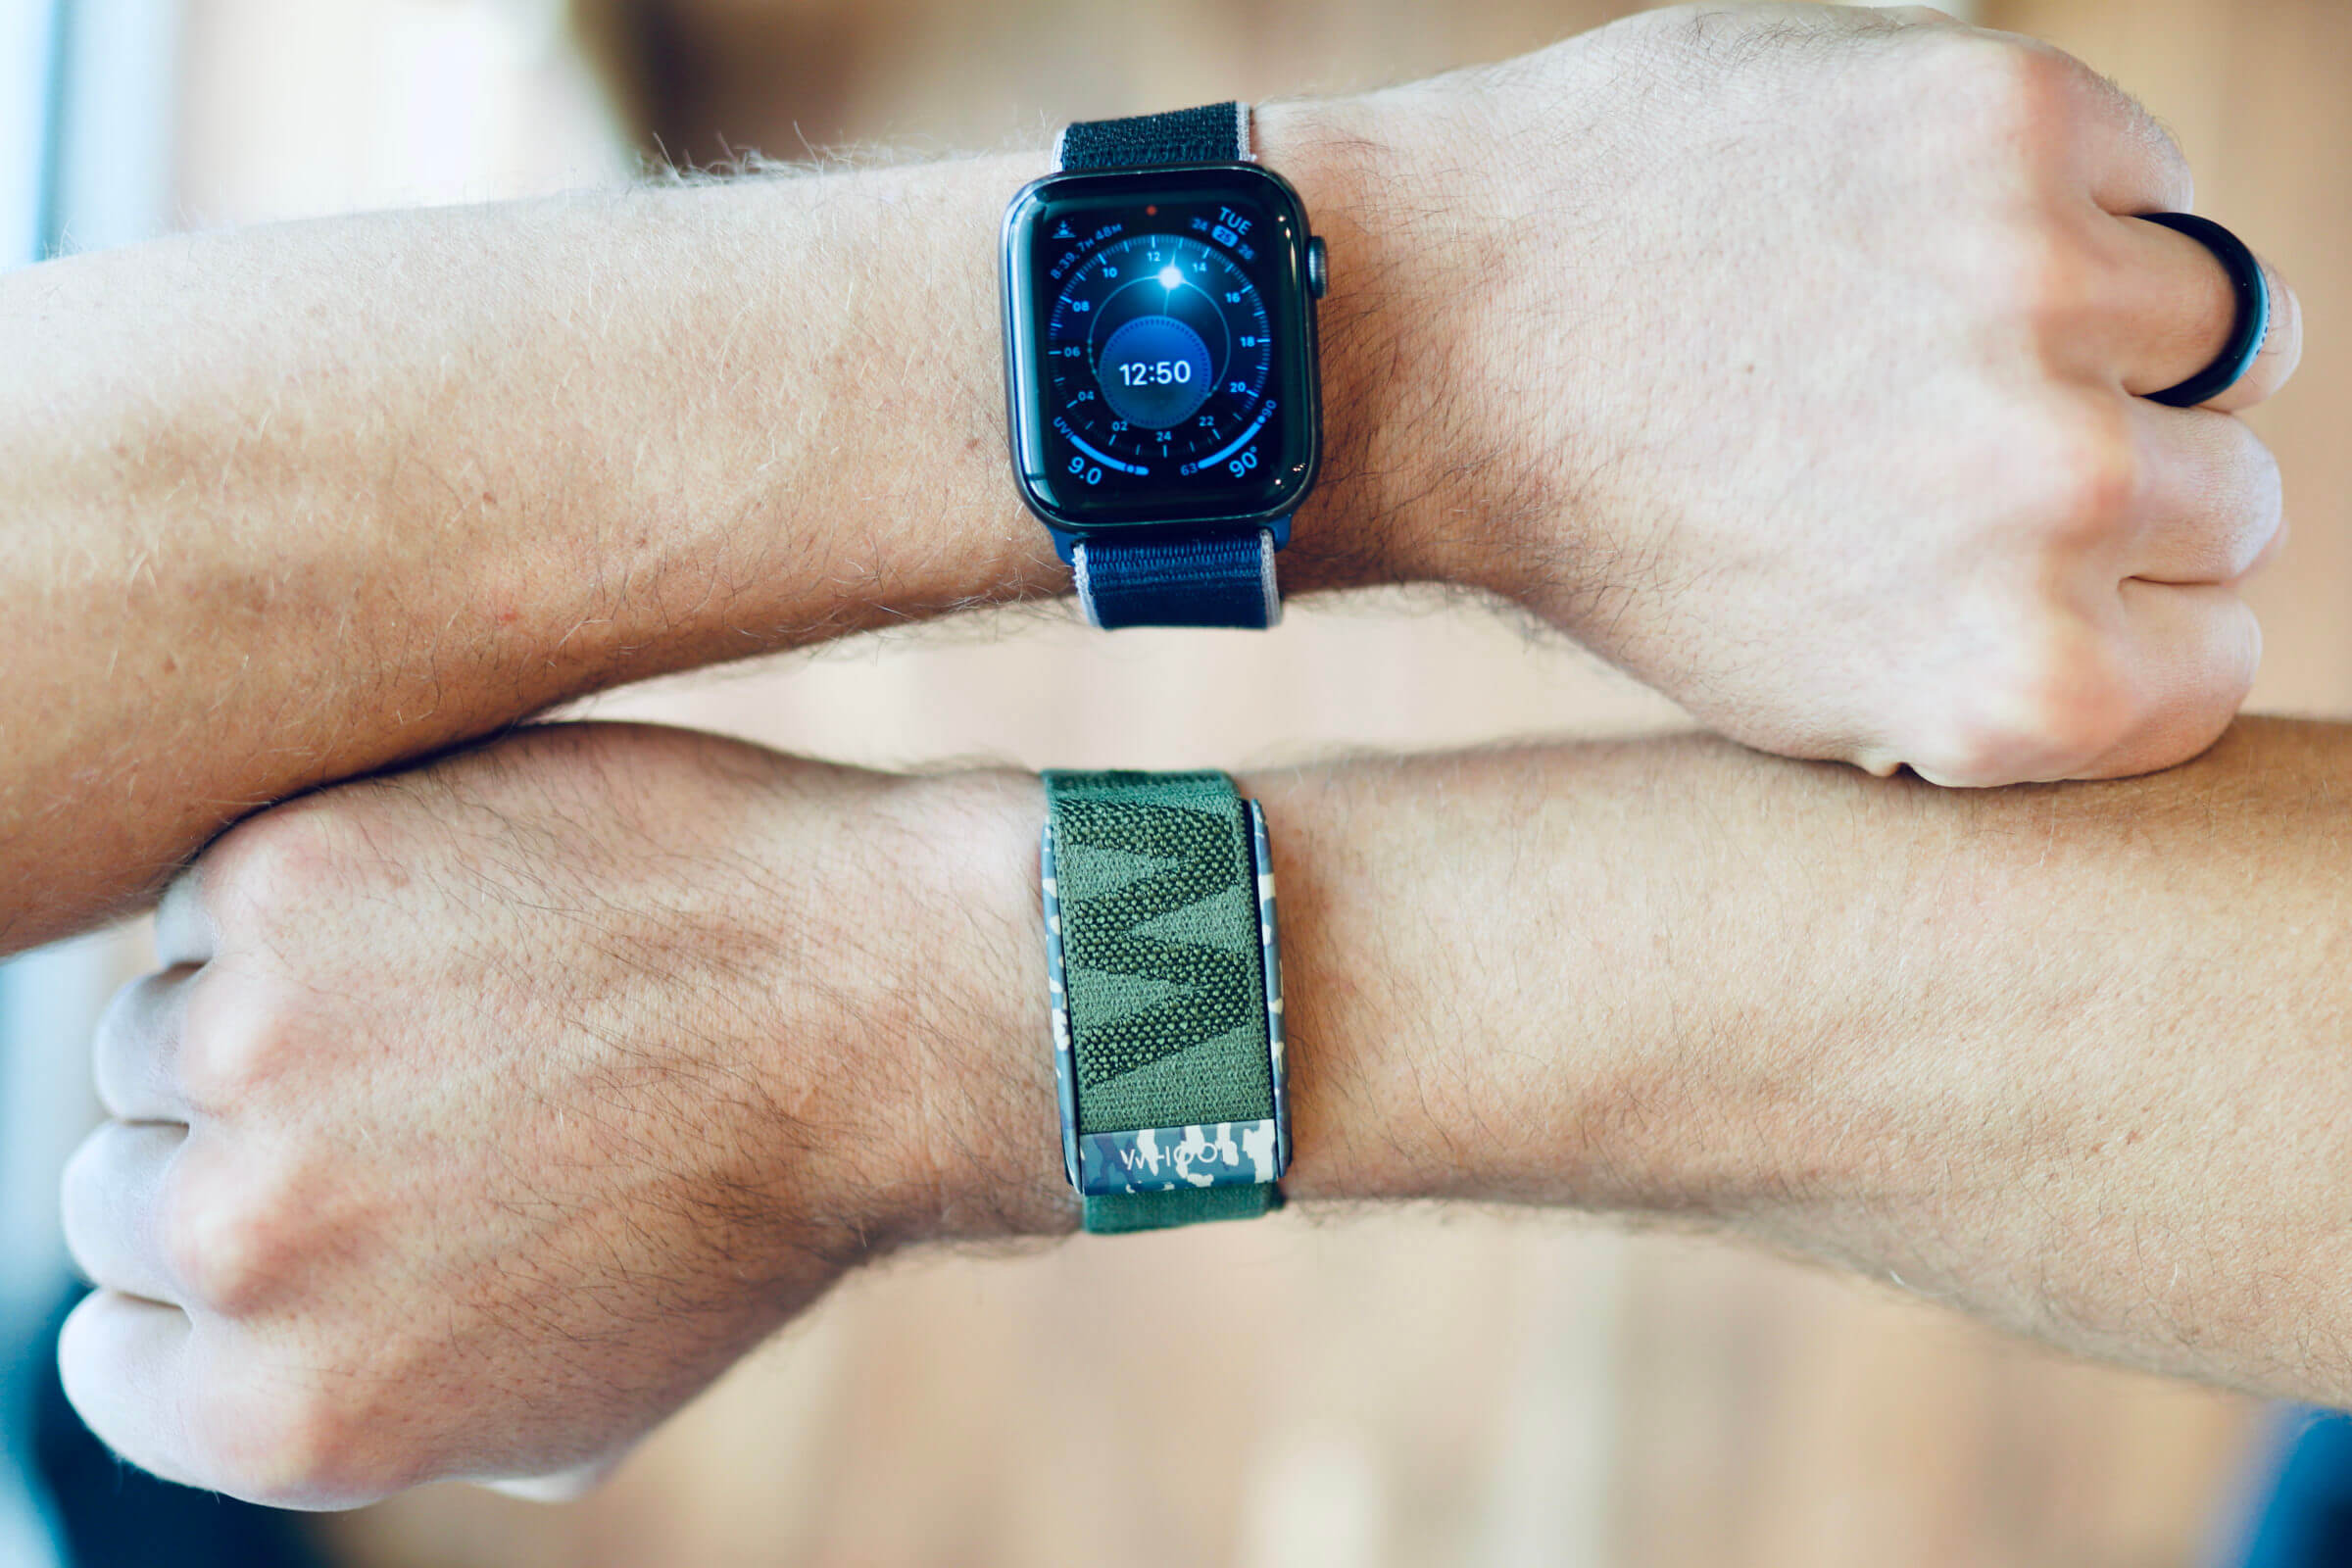 Whoop Vs. Apple Watch: Which Is Better in 2022?